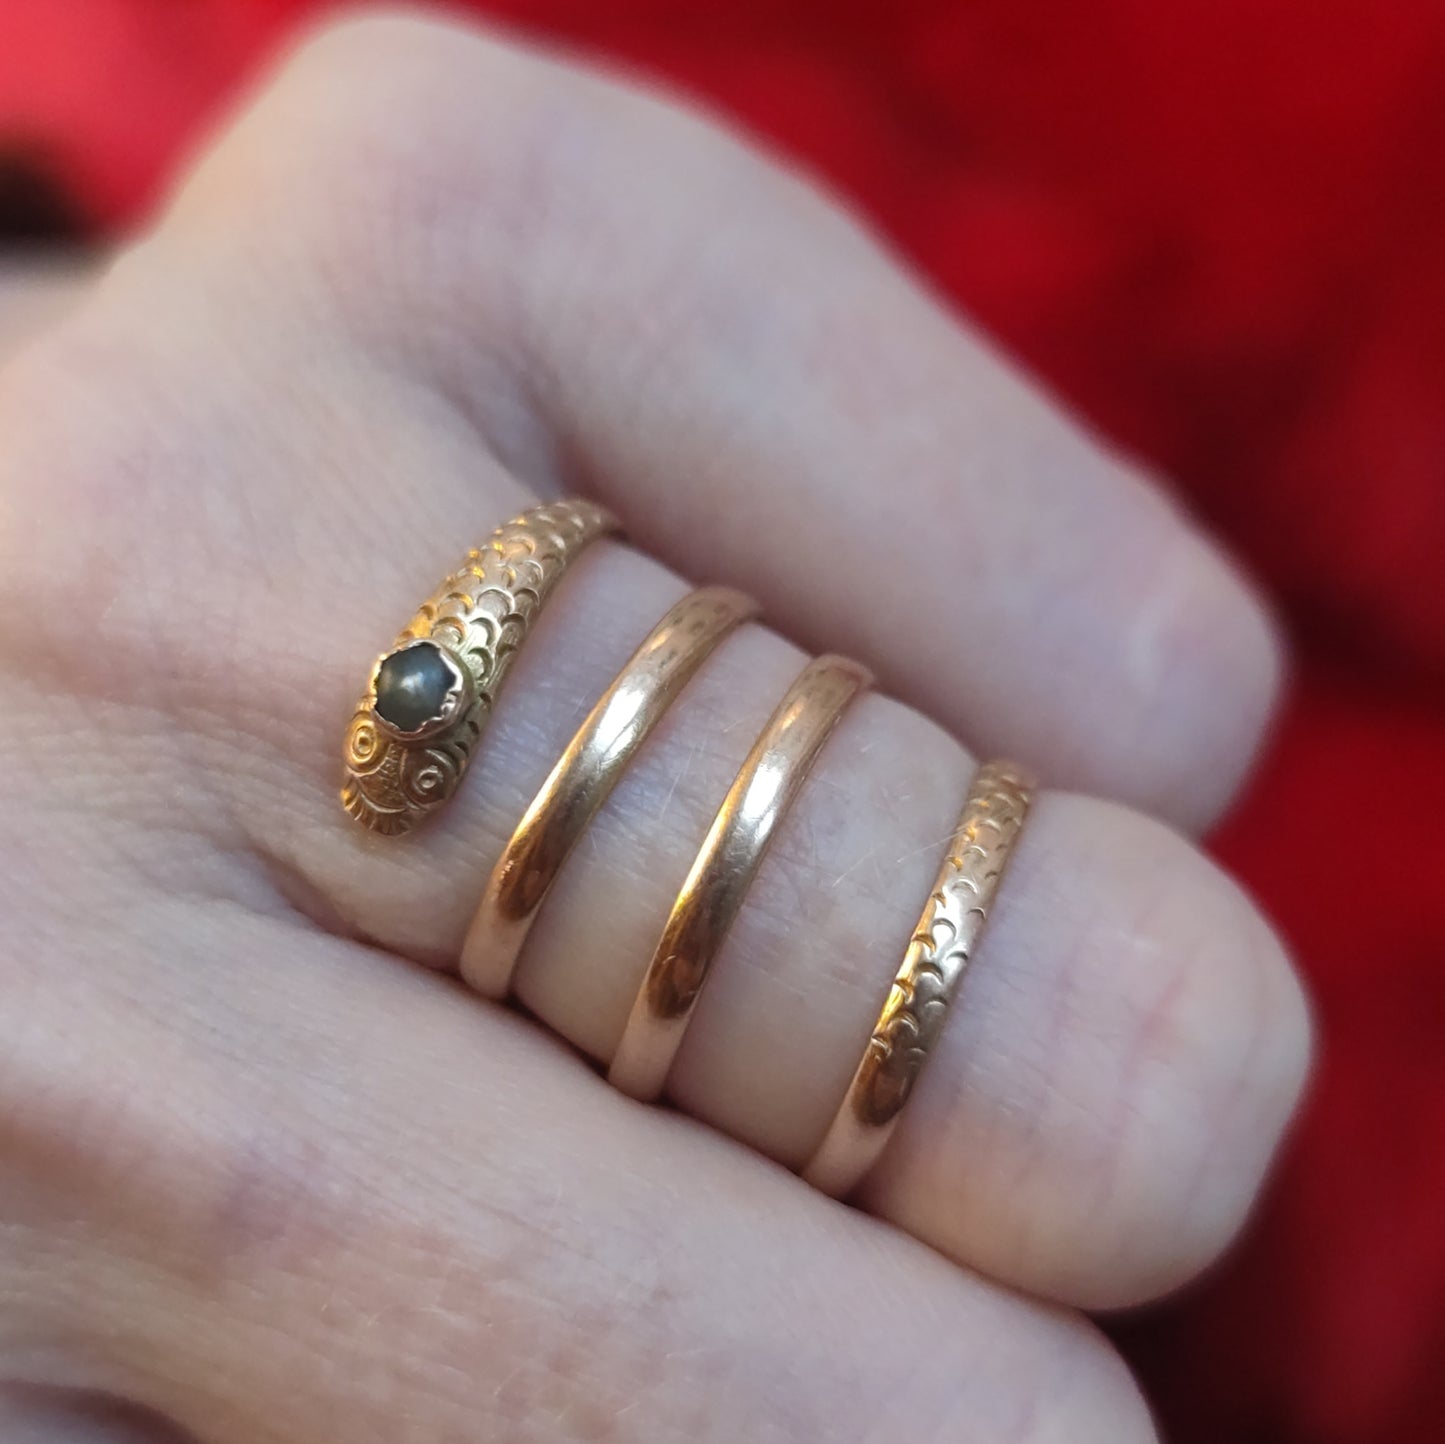 Sweet coiled serpent ring